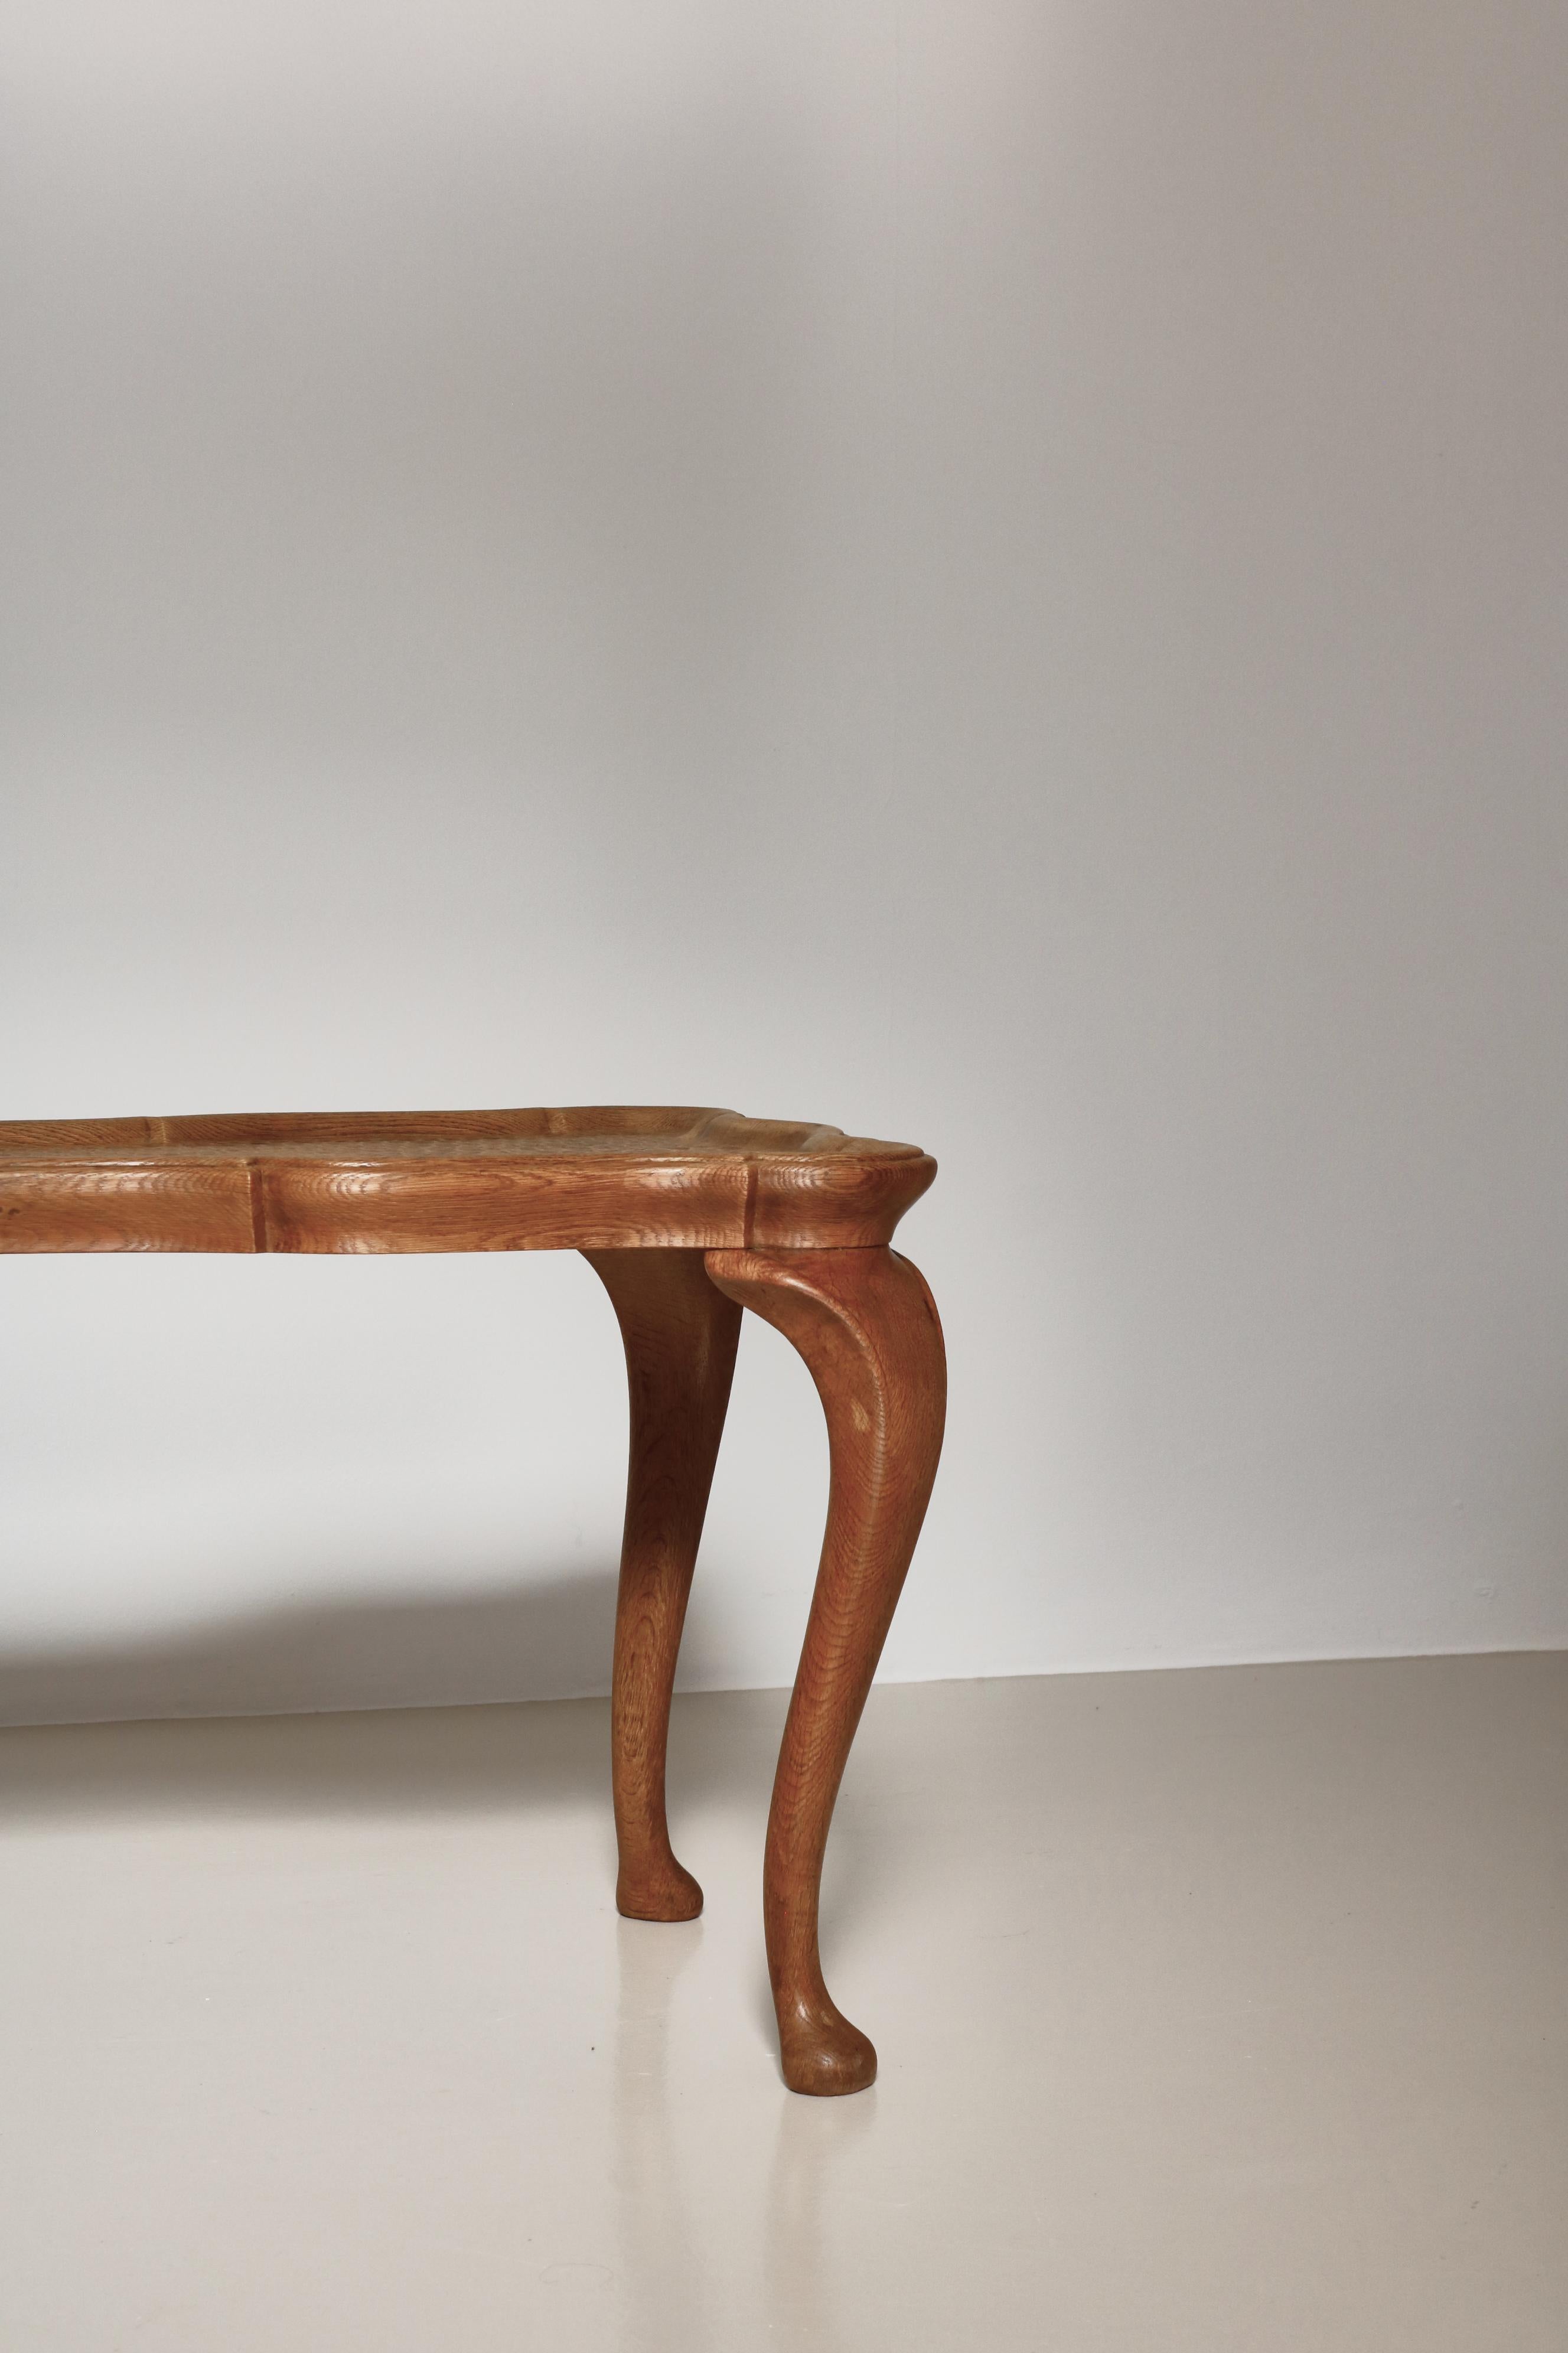 Danish Frits Henningsen Carved Coffee Table with Gouged Top Solid Oak, Denmark, 1940s